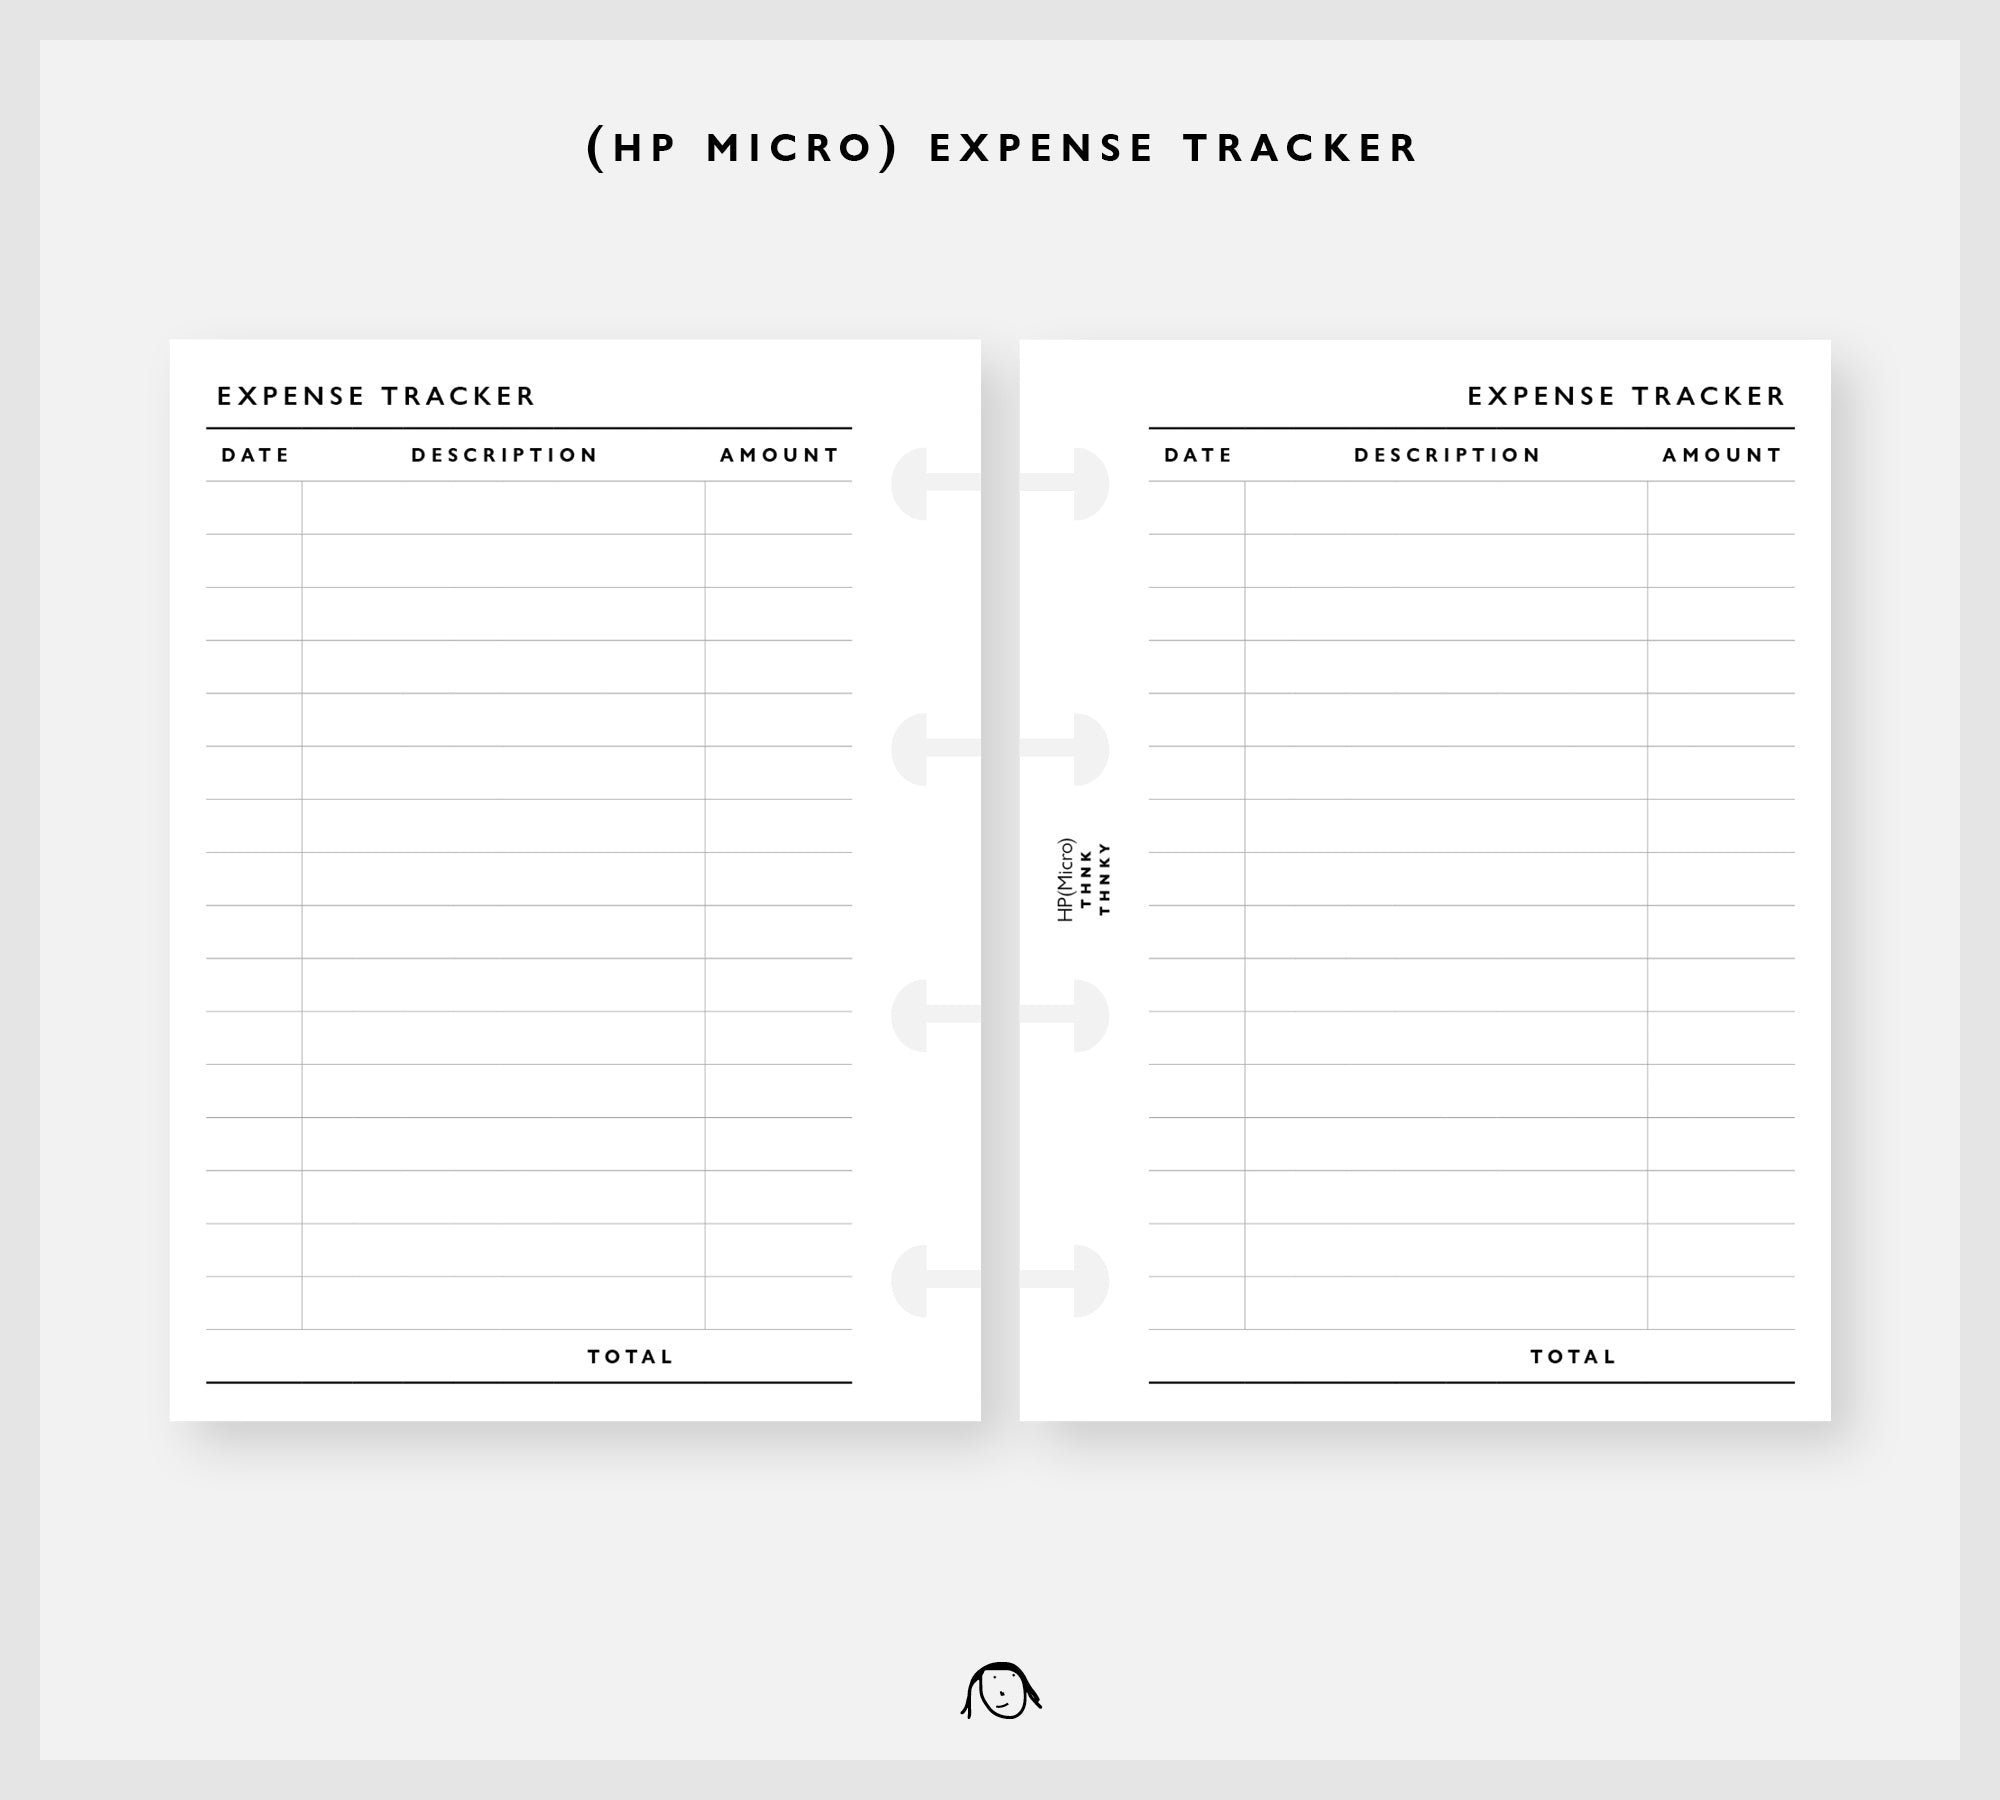 MCE3-HP Micro Size Expense Tracker